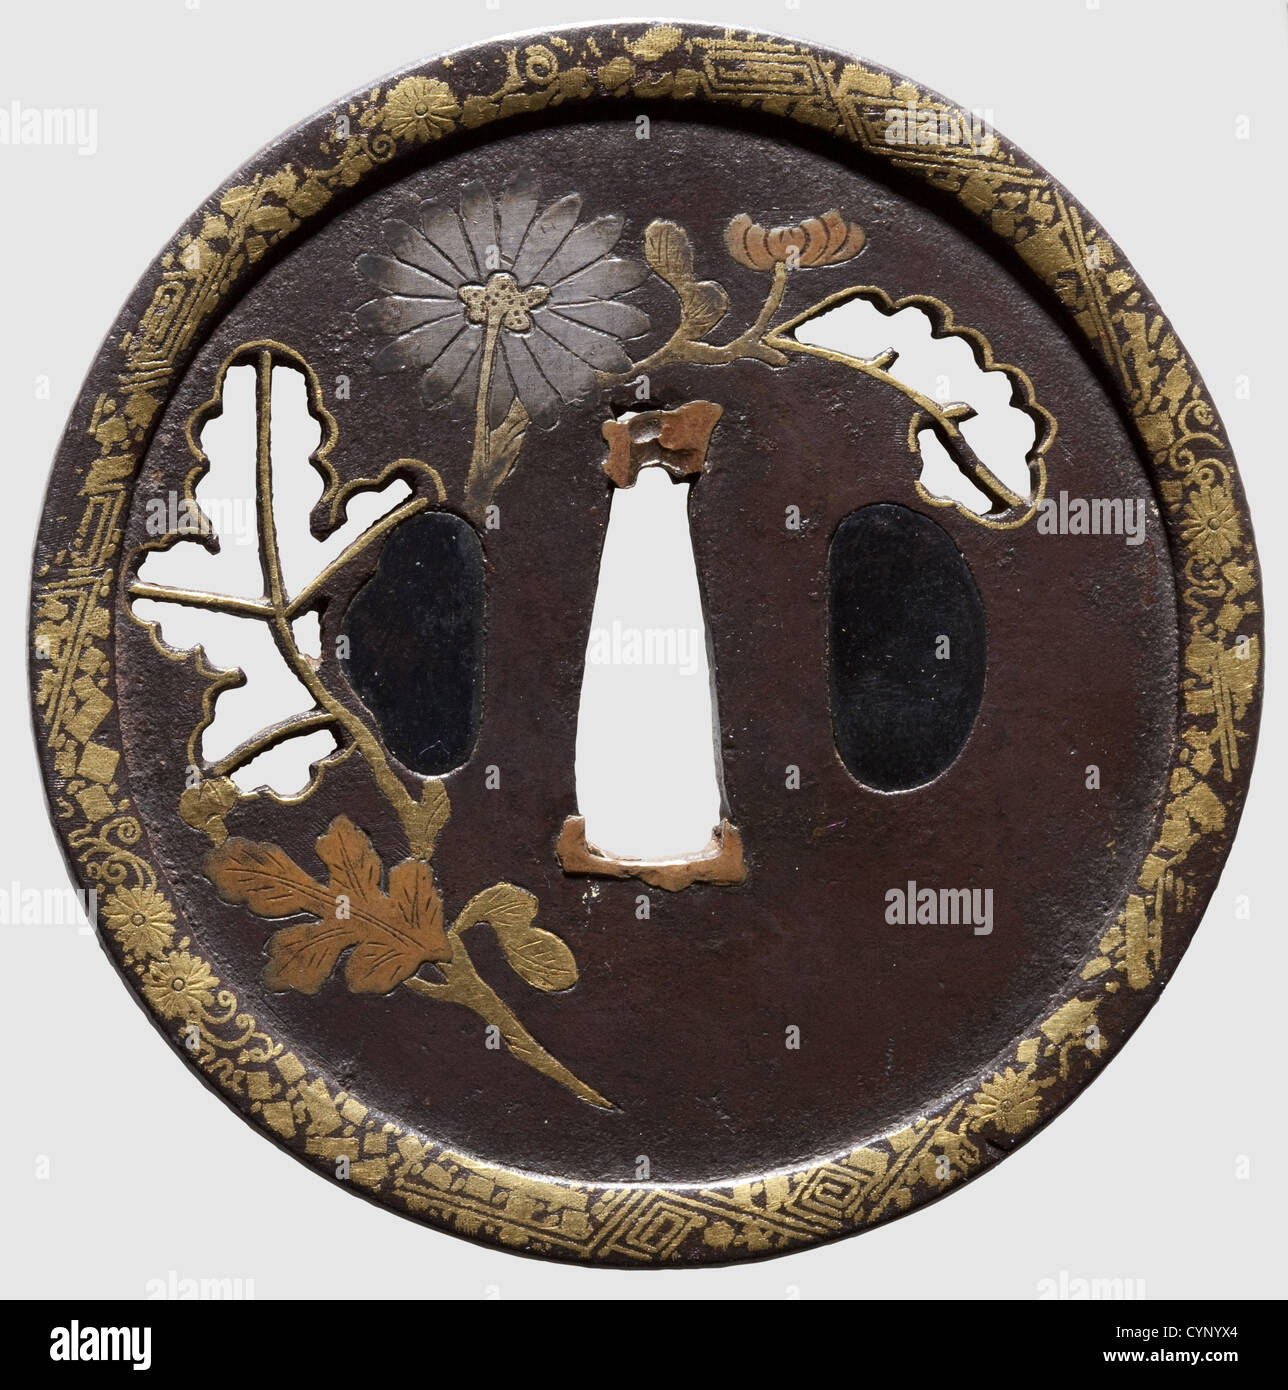 A tsuba,Japan,mid-Edo period. Iron marugata tsuba,probably a work from Awa Province. Raised rim with geometrical and floral decoration in gold nunome-zogan. The plate tapering slightly to the rim with a negative peony leaf sukashi,the edges and veins applied with gilt copper. Peony blossoms and leaves in hira-zogan in engraved copper,gold and silver. Diameter 8 cm,historic,historical,18th century,Japanese,Asian,Asia,Far East,object,objects,stills,clipping,clippings,cut out,cut-out,cut-outs,fine arts,art,art object,art objects,artful,pr,Additional-Rights-Clearences-Not Available Stock Photo